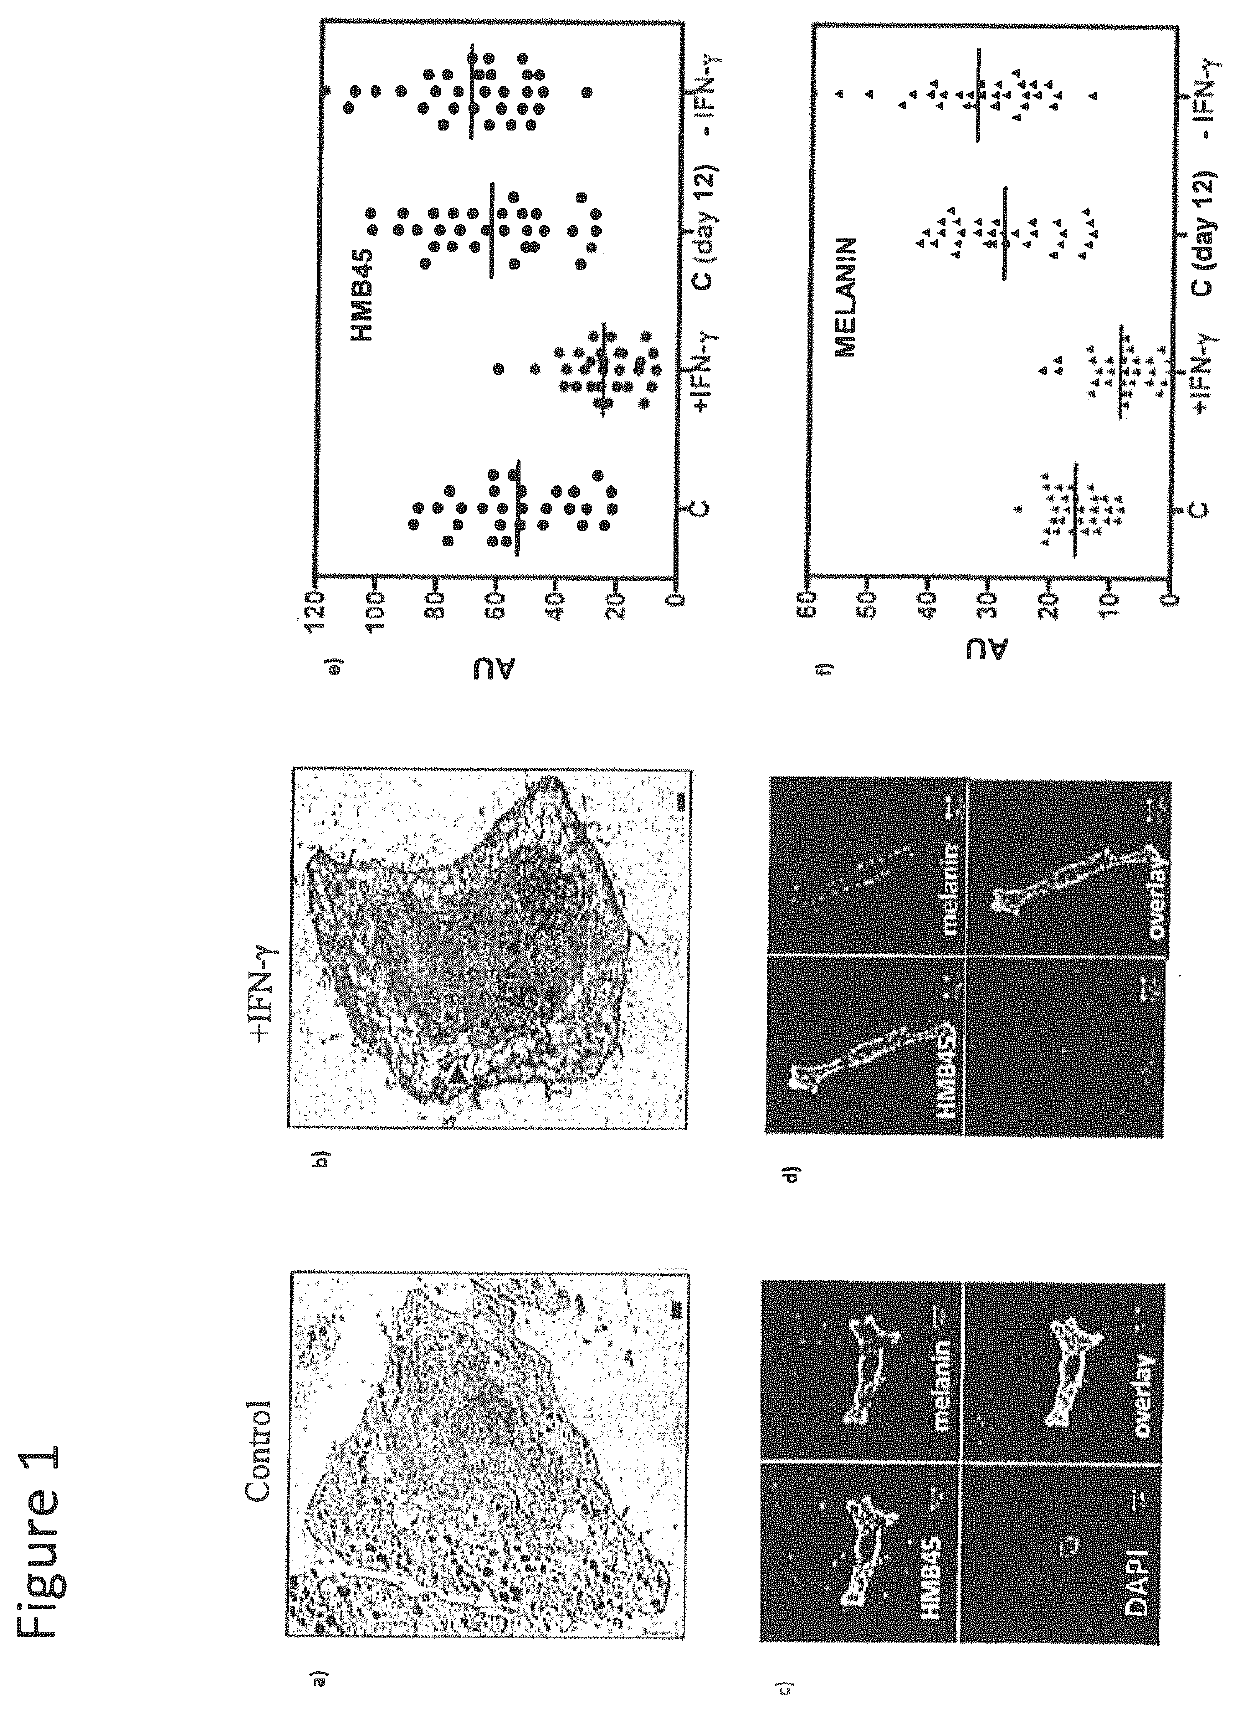 Method to modulate pigmentation process in the melanocytes of skin